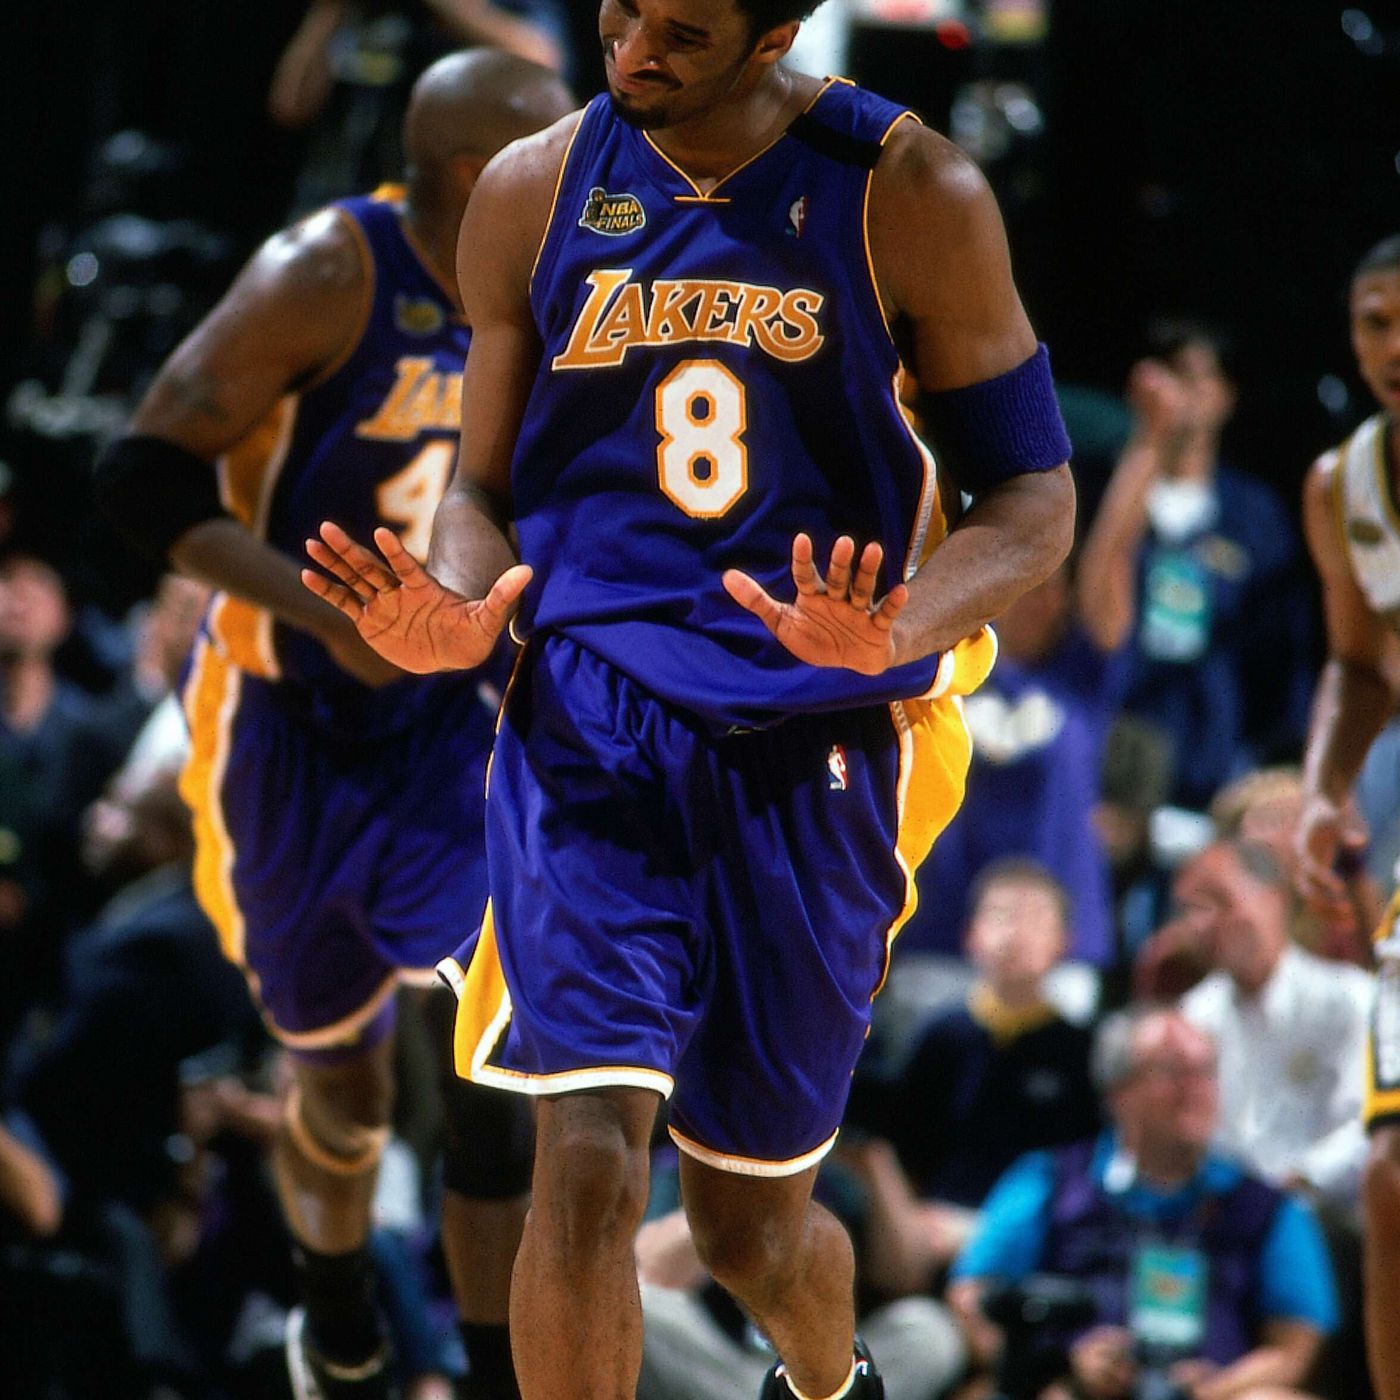 Re-watching the heroics of Kobe Bryant in Game 4 of the 2000 NBA